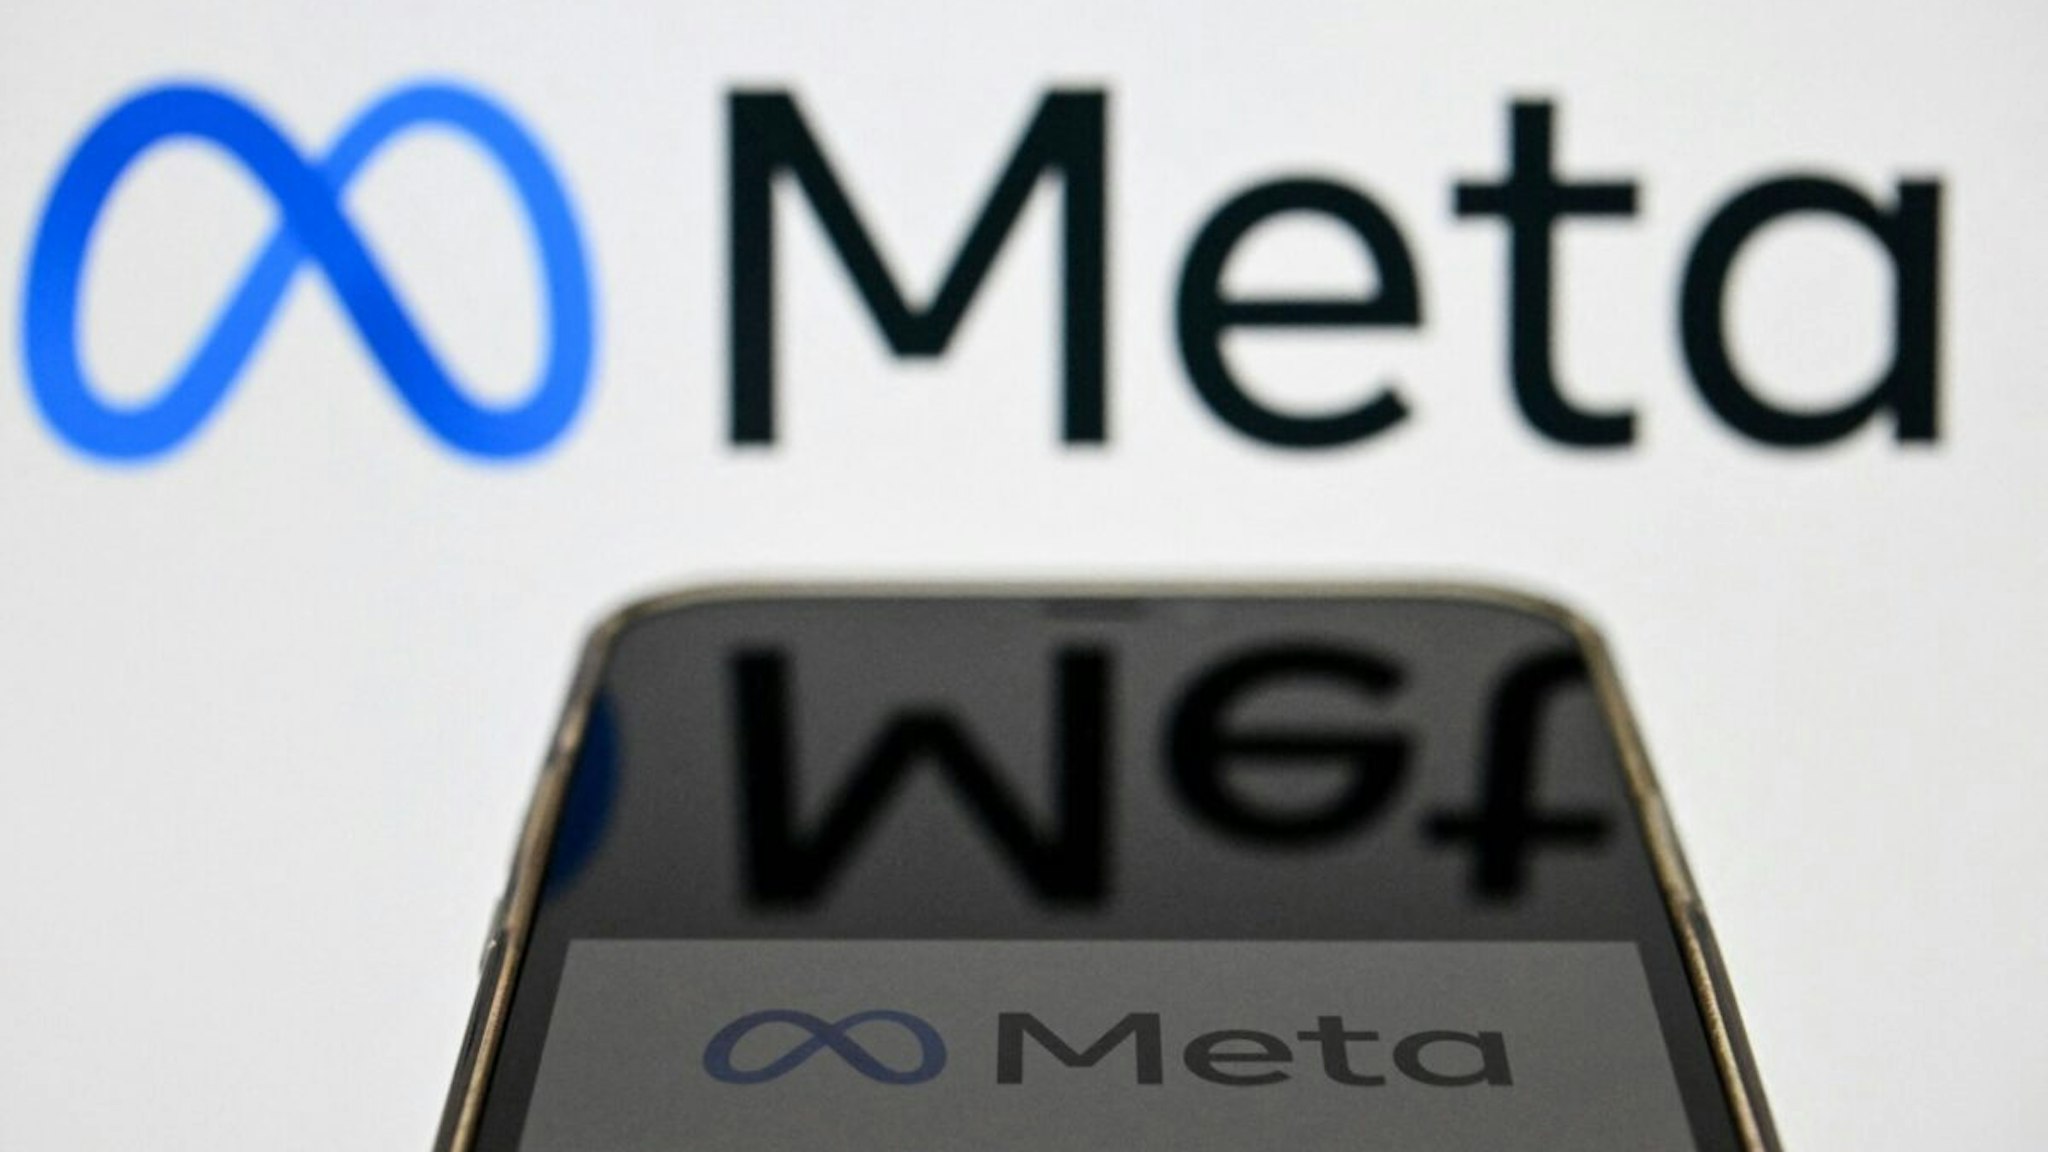 Photo taken on October 28, 2022, shows the META logo on a smartphone screen in Moscow